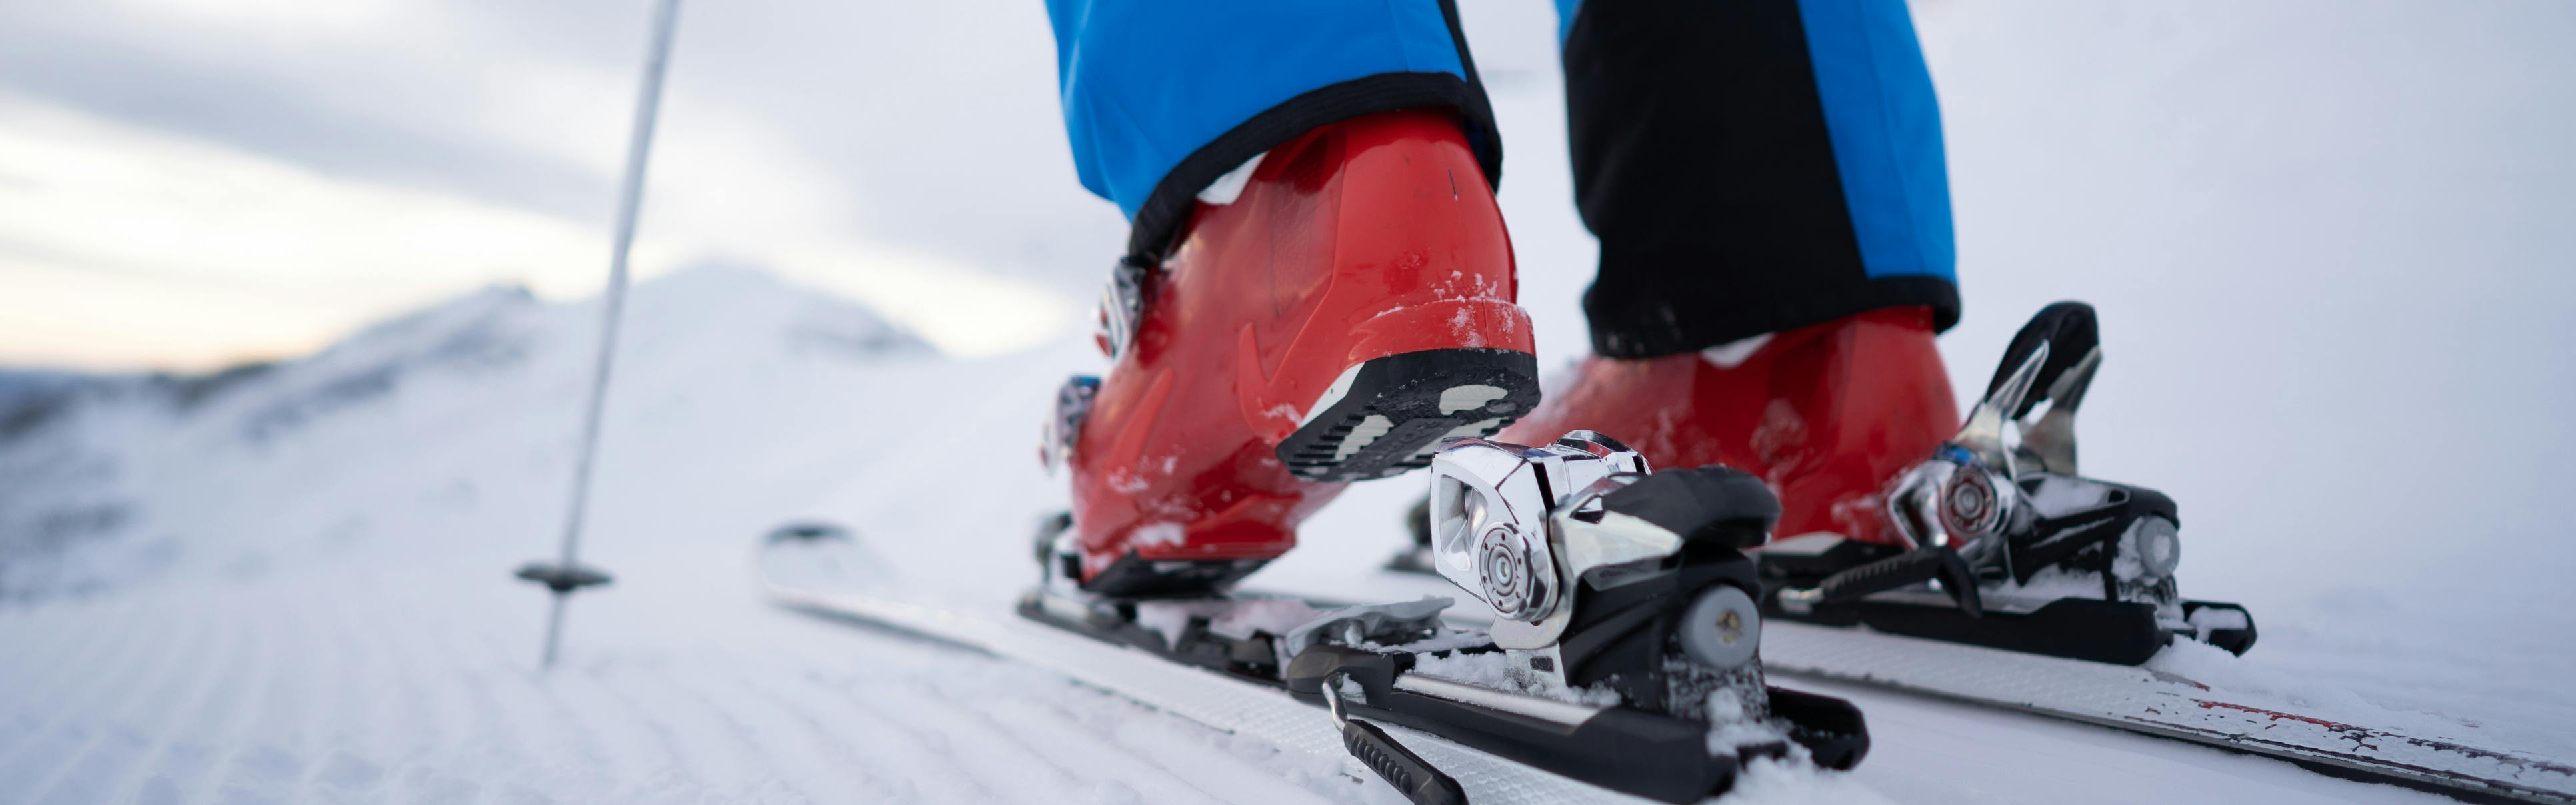 A person wearing red ski boots and blue pants steps into their skis